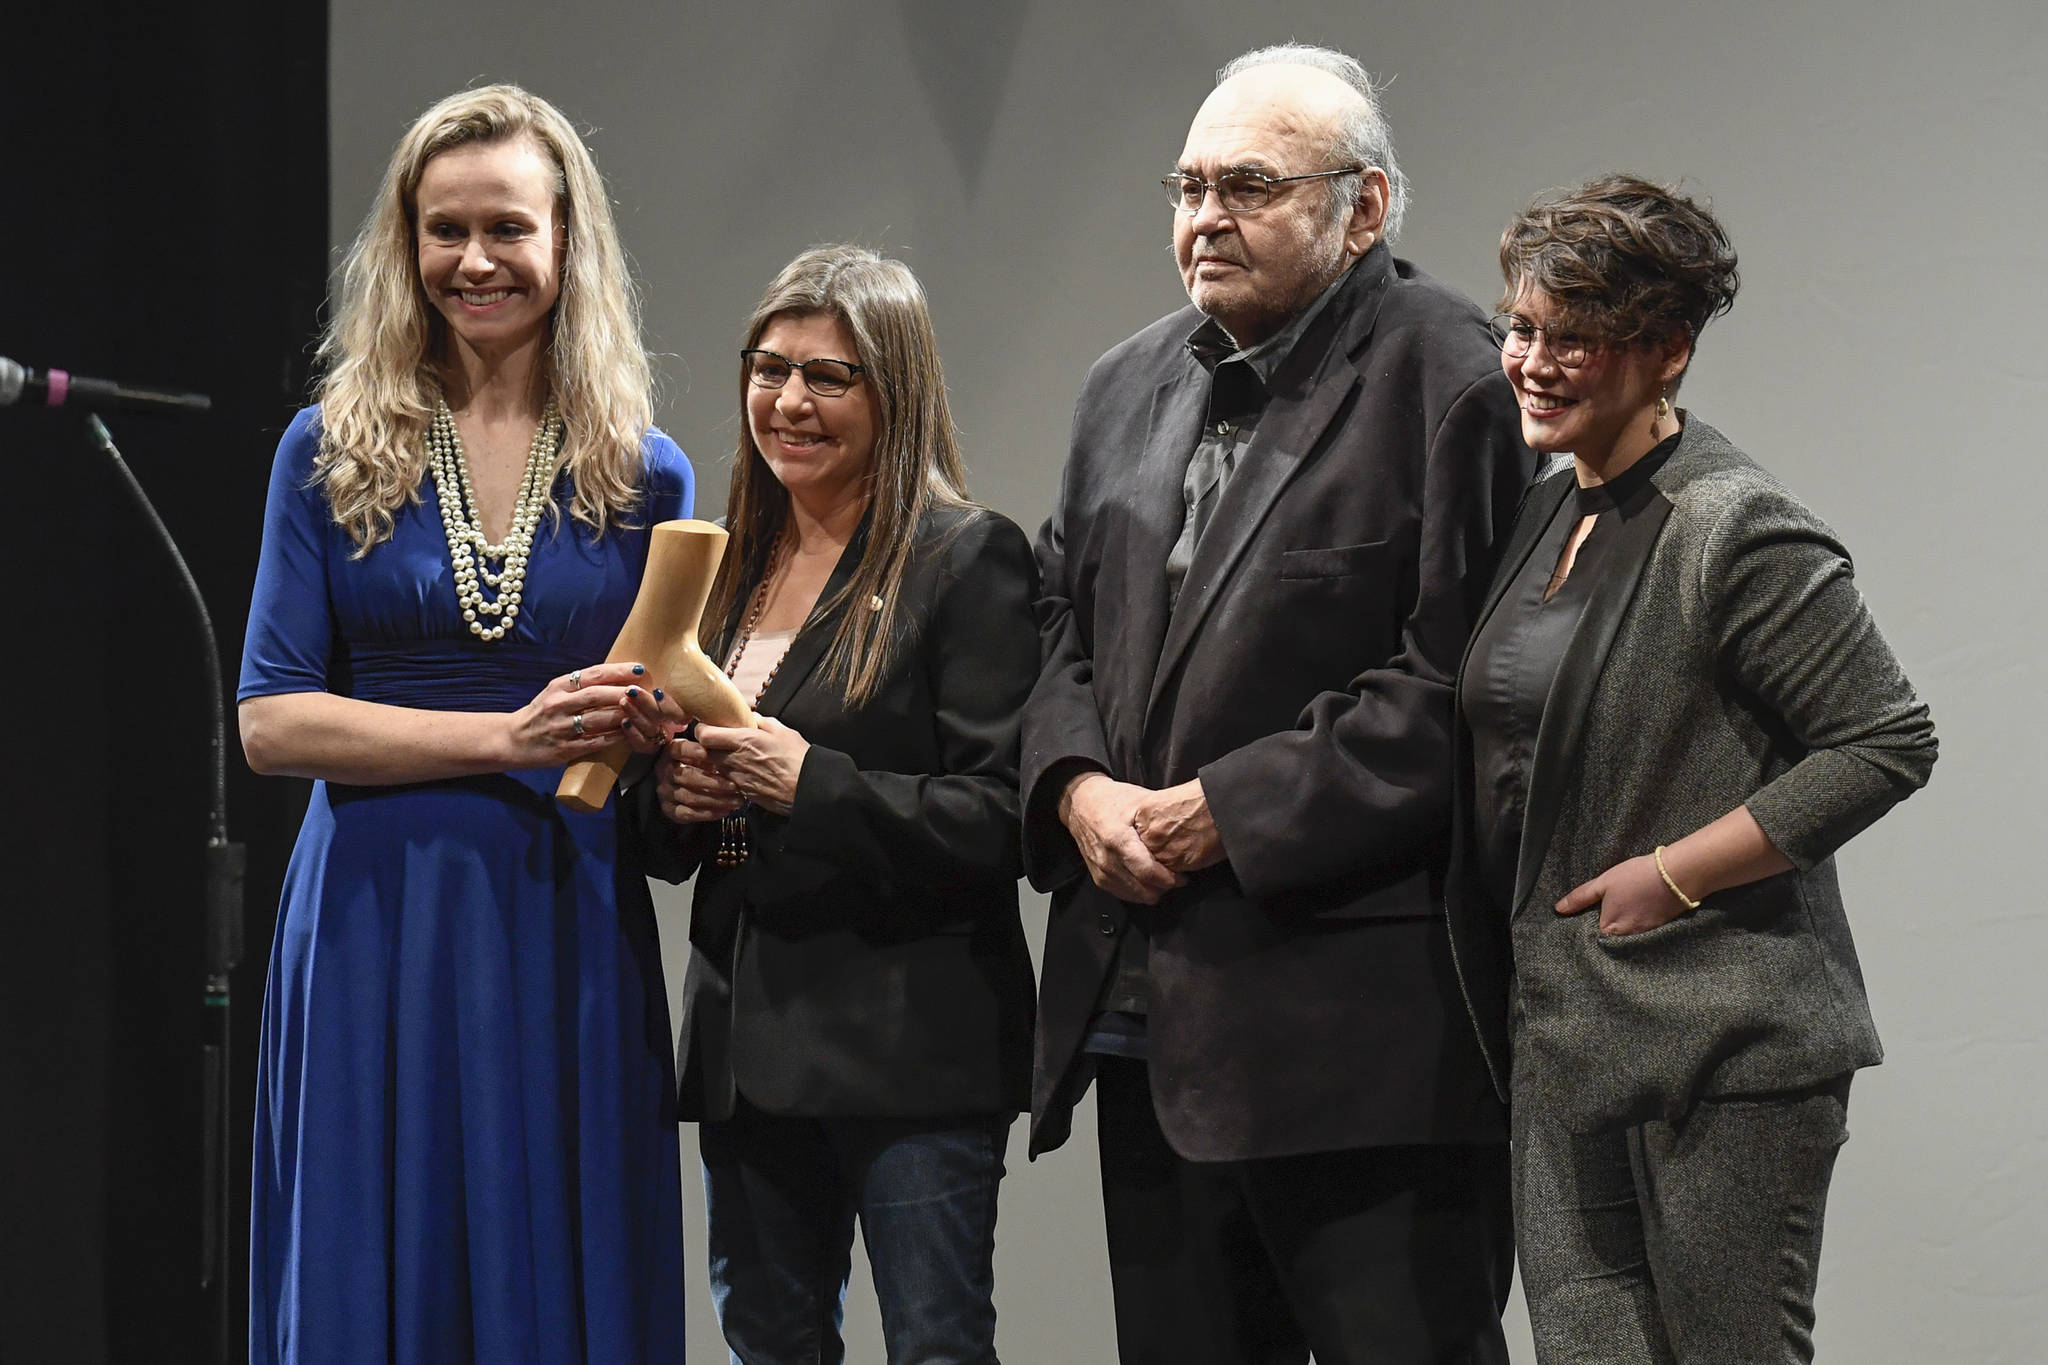 Members of the Chugach Regional Resources Commission, of Anchorage, receive their Distinguished Service to the Humanities Award for Education from Kelly Tshibaka, Commissioner of the Department of Administration, at the 2019 Governor’s Arts and Humanities Awards at the Juneau Arts & Culture Center on Thursday, Feb. 7, 2019. (Michael Penn | Juneau Empire)